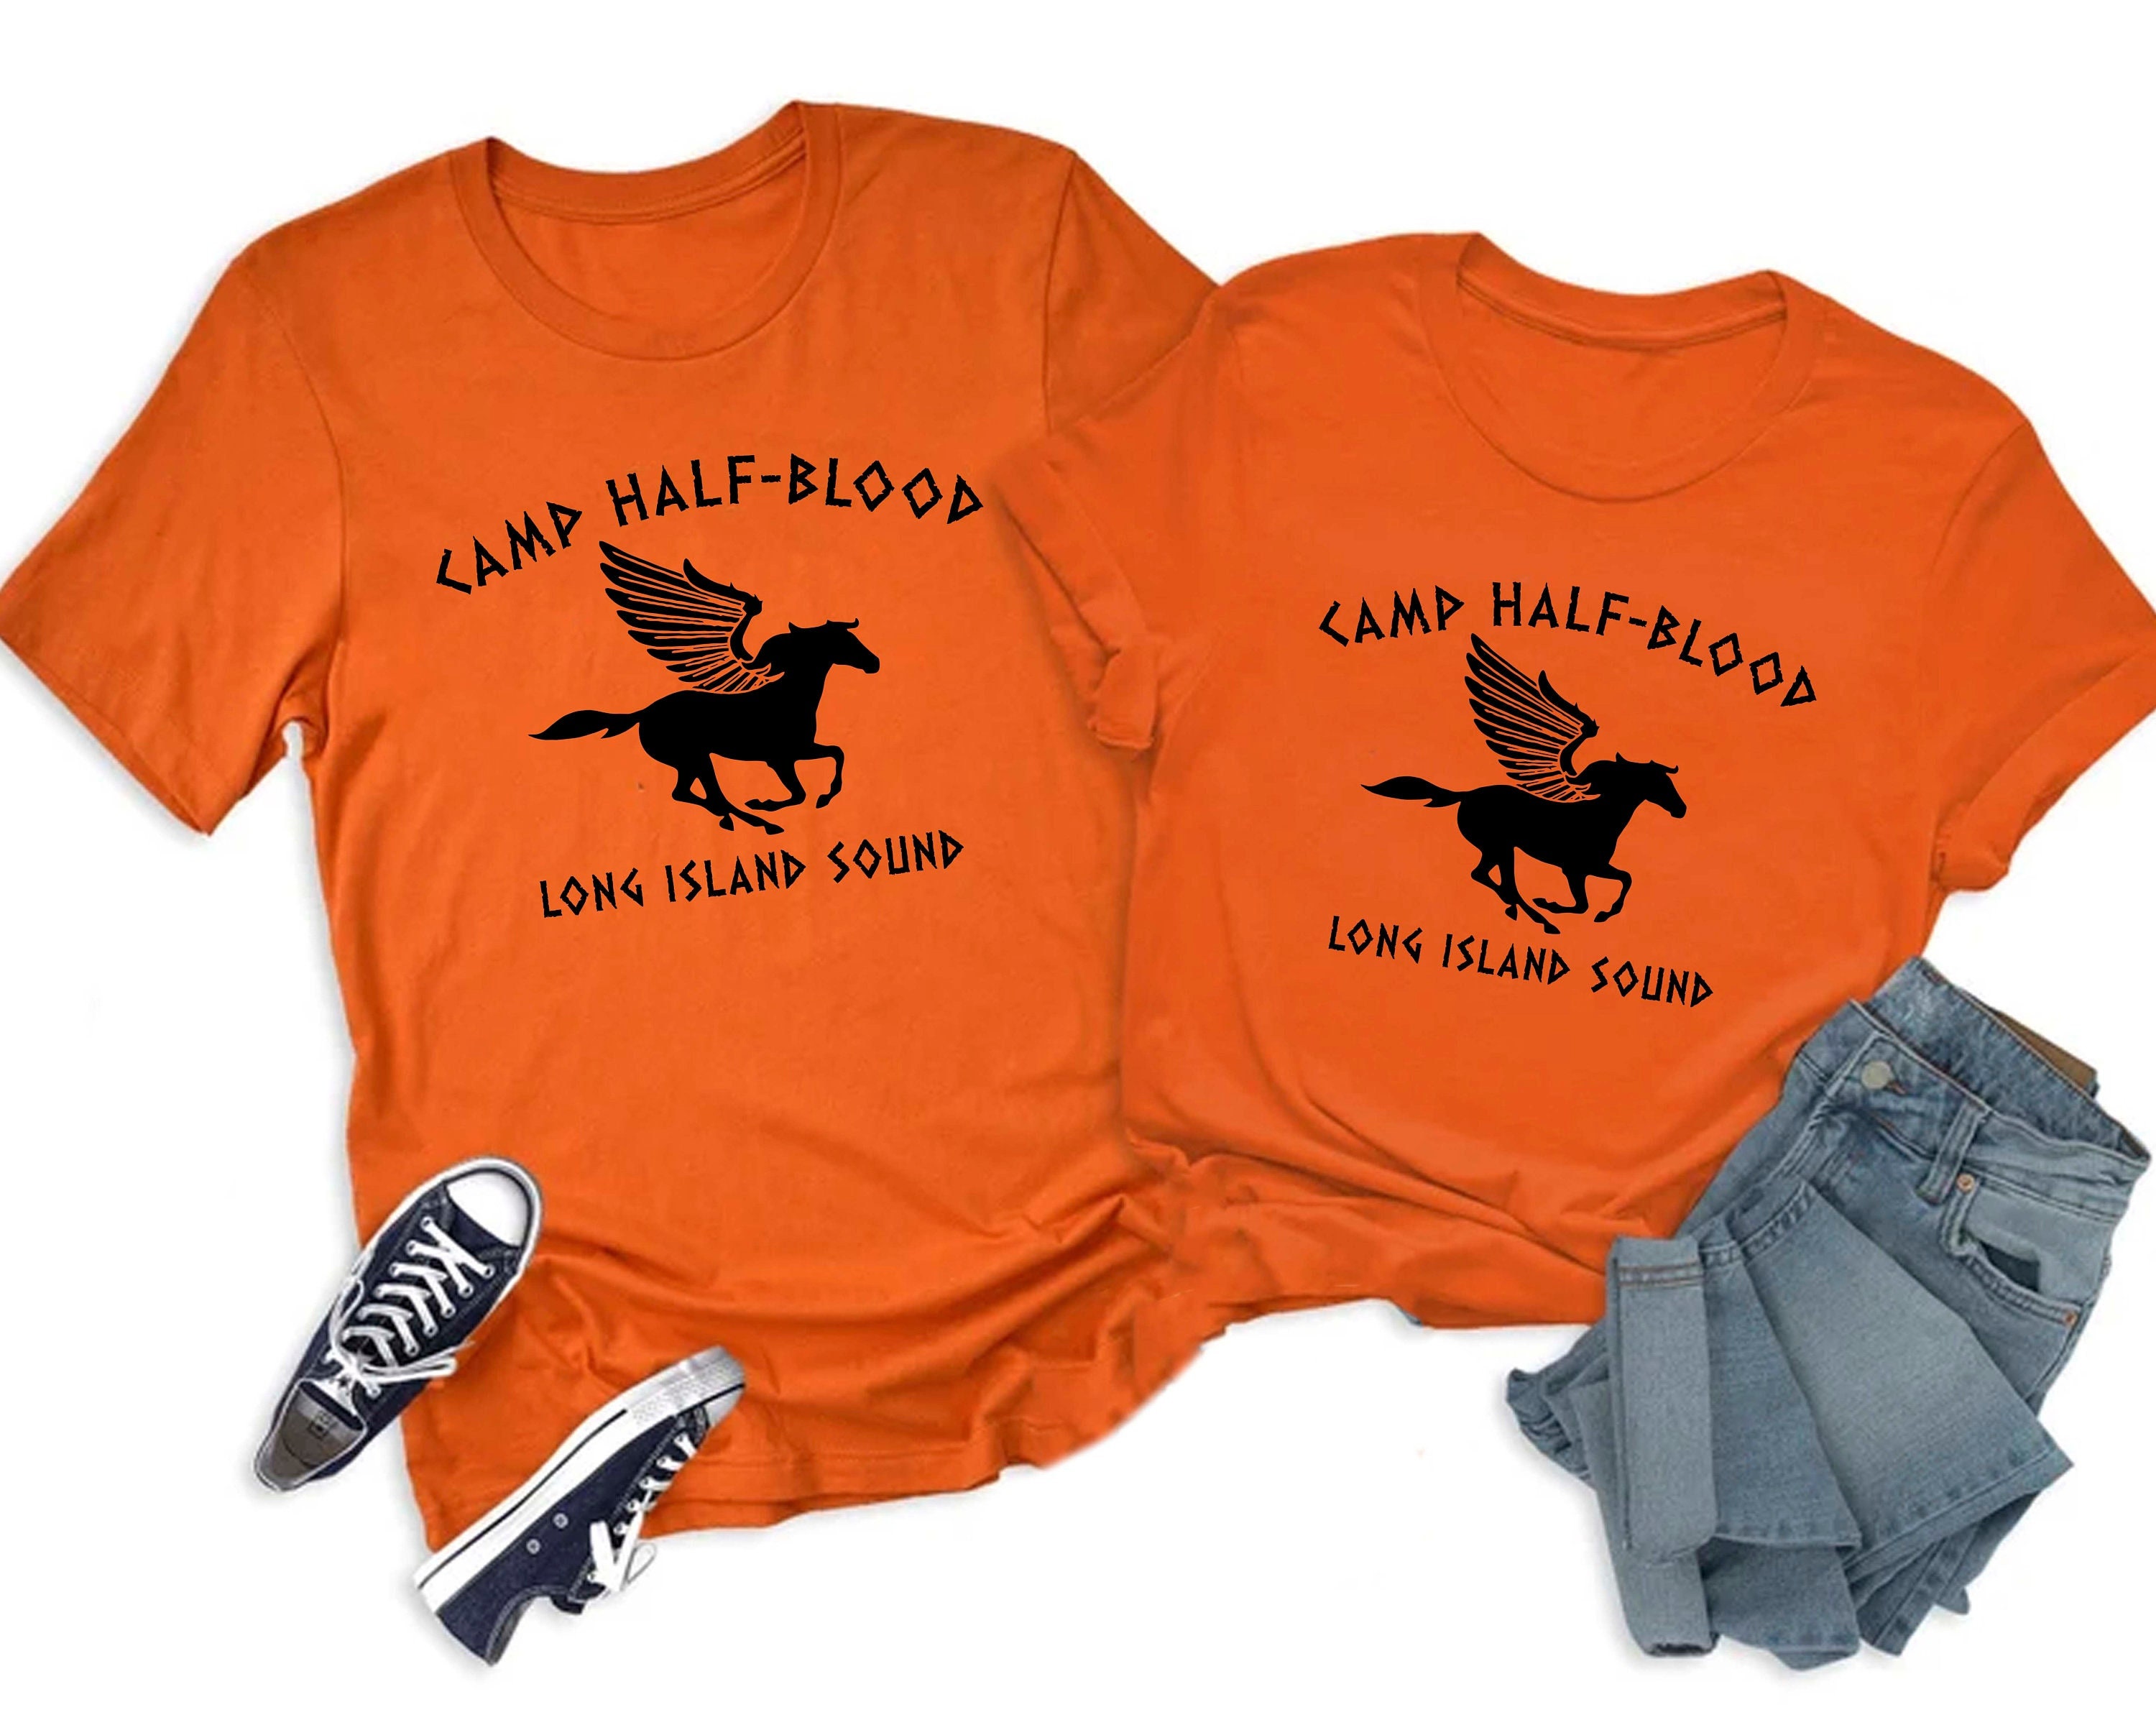 Orange Camp Half-Blood Shirt, Olympian Training Camp Game Shirt, Halloween  Magical Gift, Cute Goth, Matching Family, Spooky Adult Oracle costume (S)